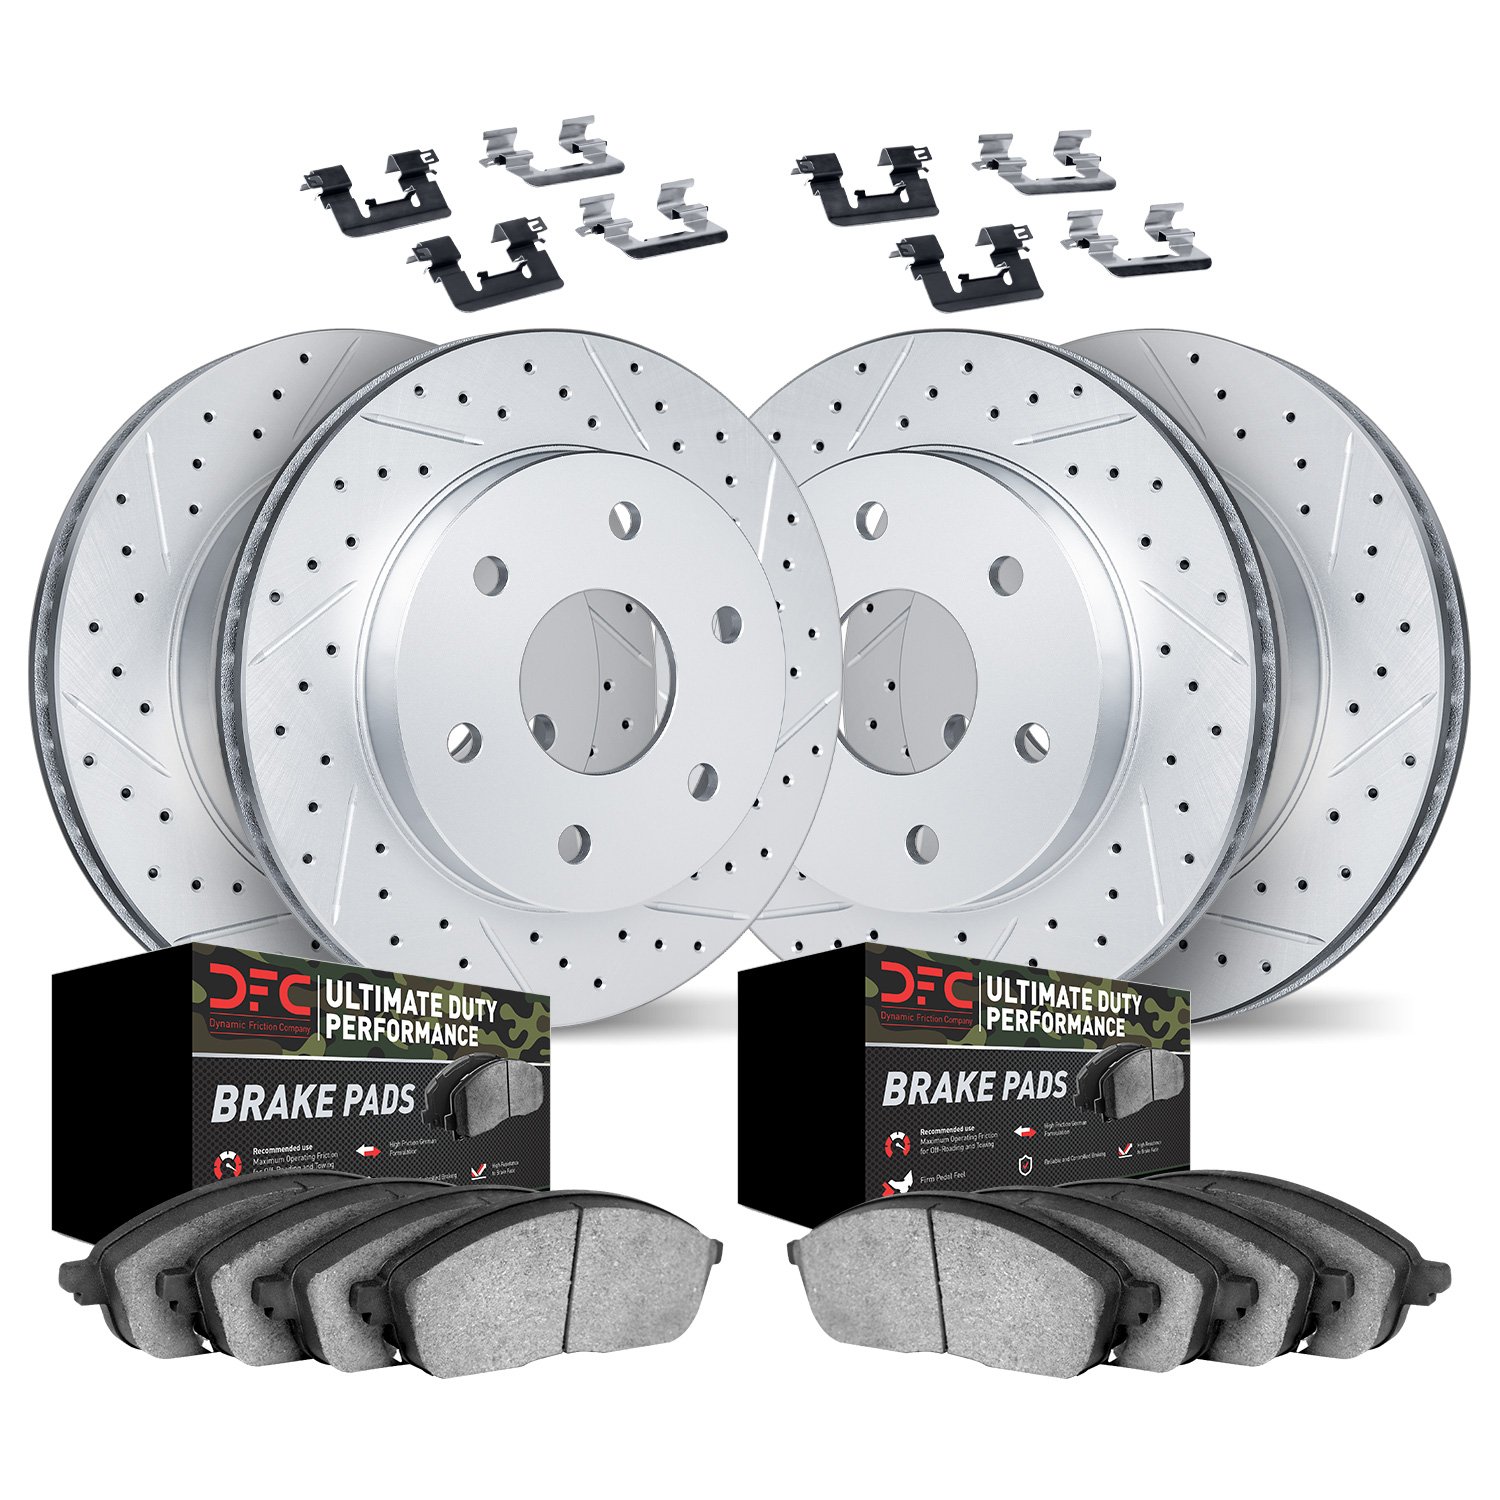 2414-54026 Geoperformance Drilled/Slotted Brake Rotors with Ultimate-Duty Brake Pads Kit & Hardware, 2004-2008 Ford/Lincoln/Merc